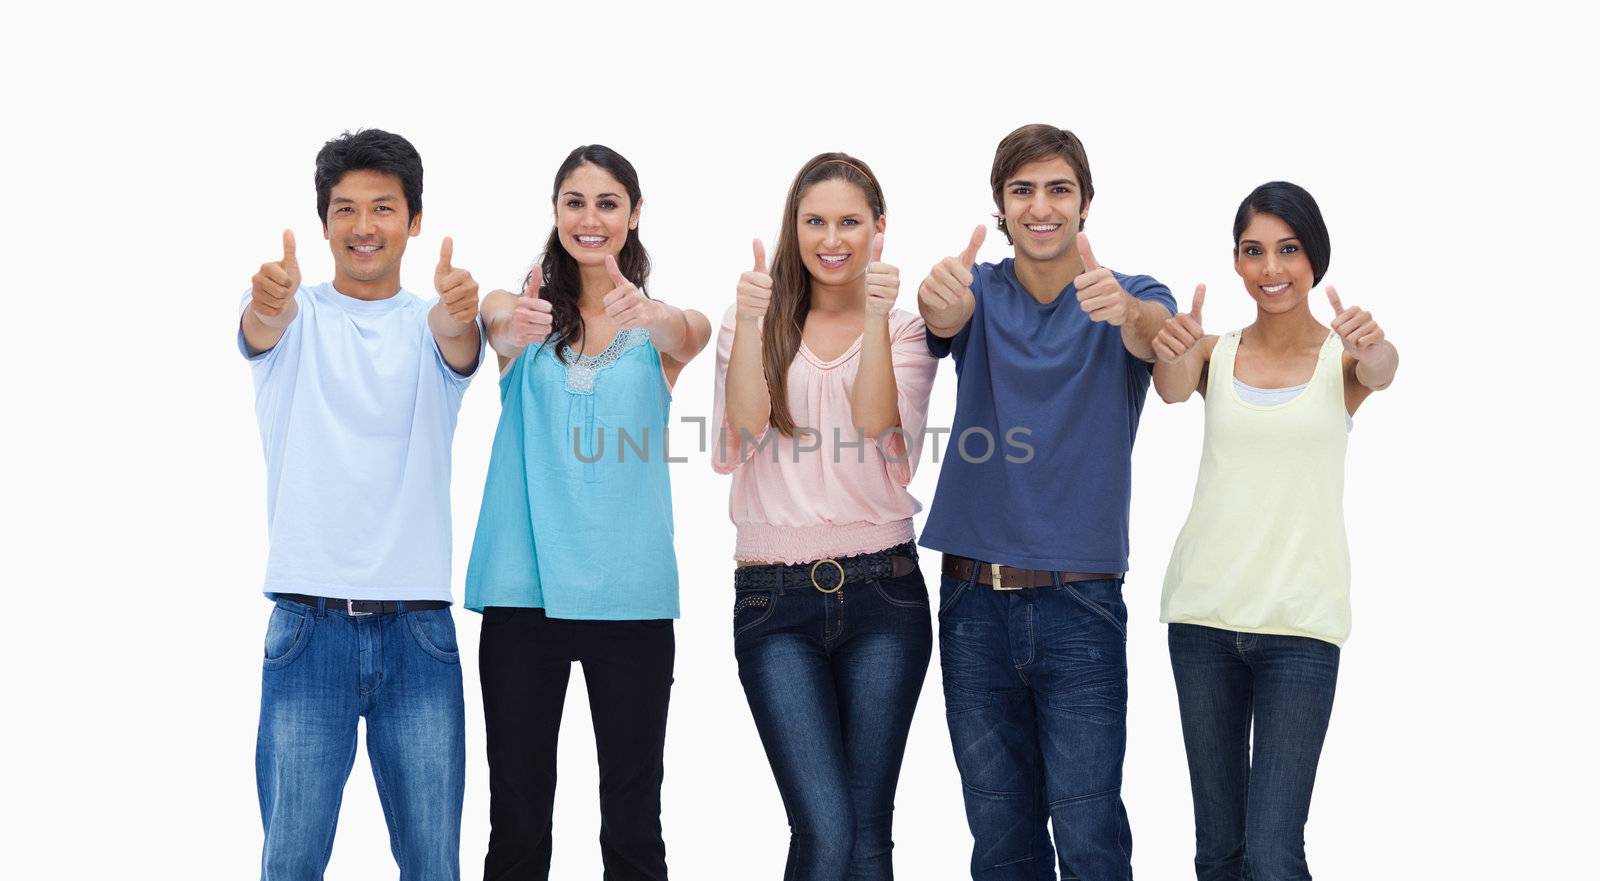 Customers approving against white background